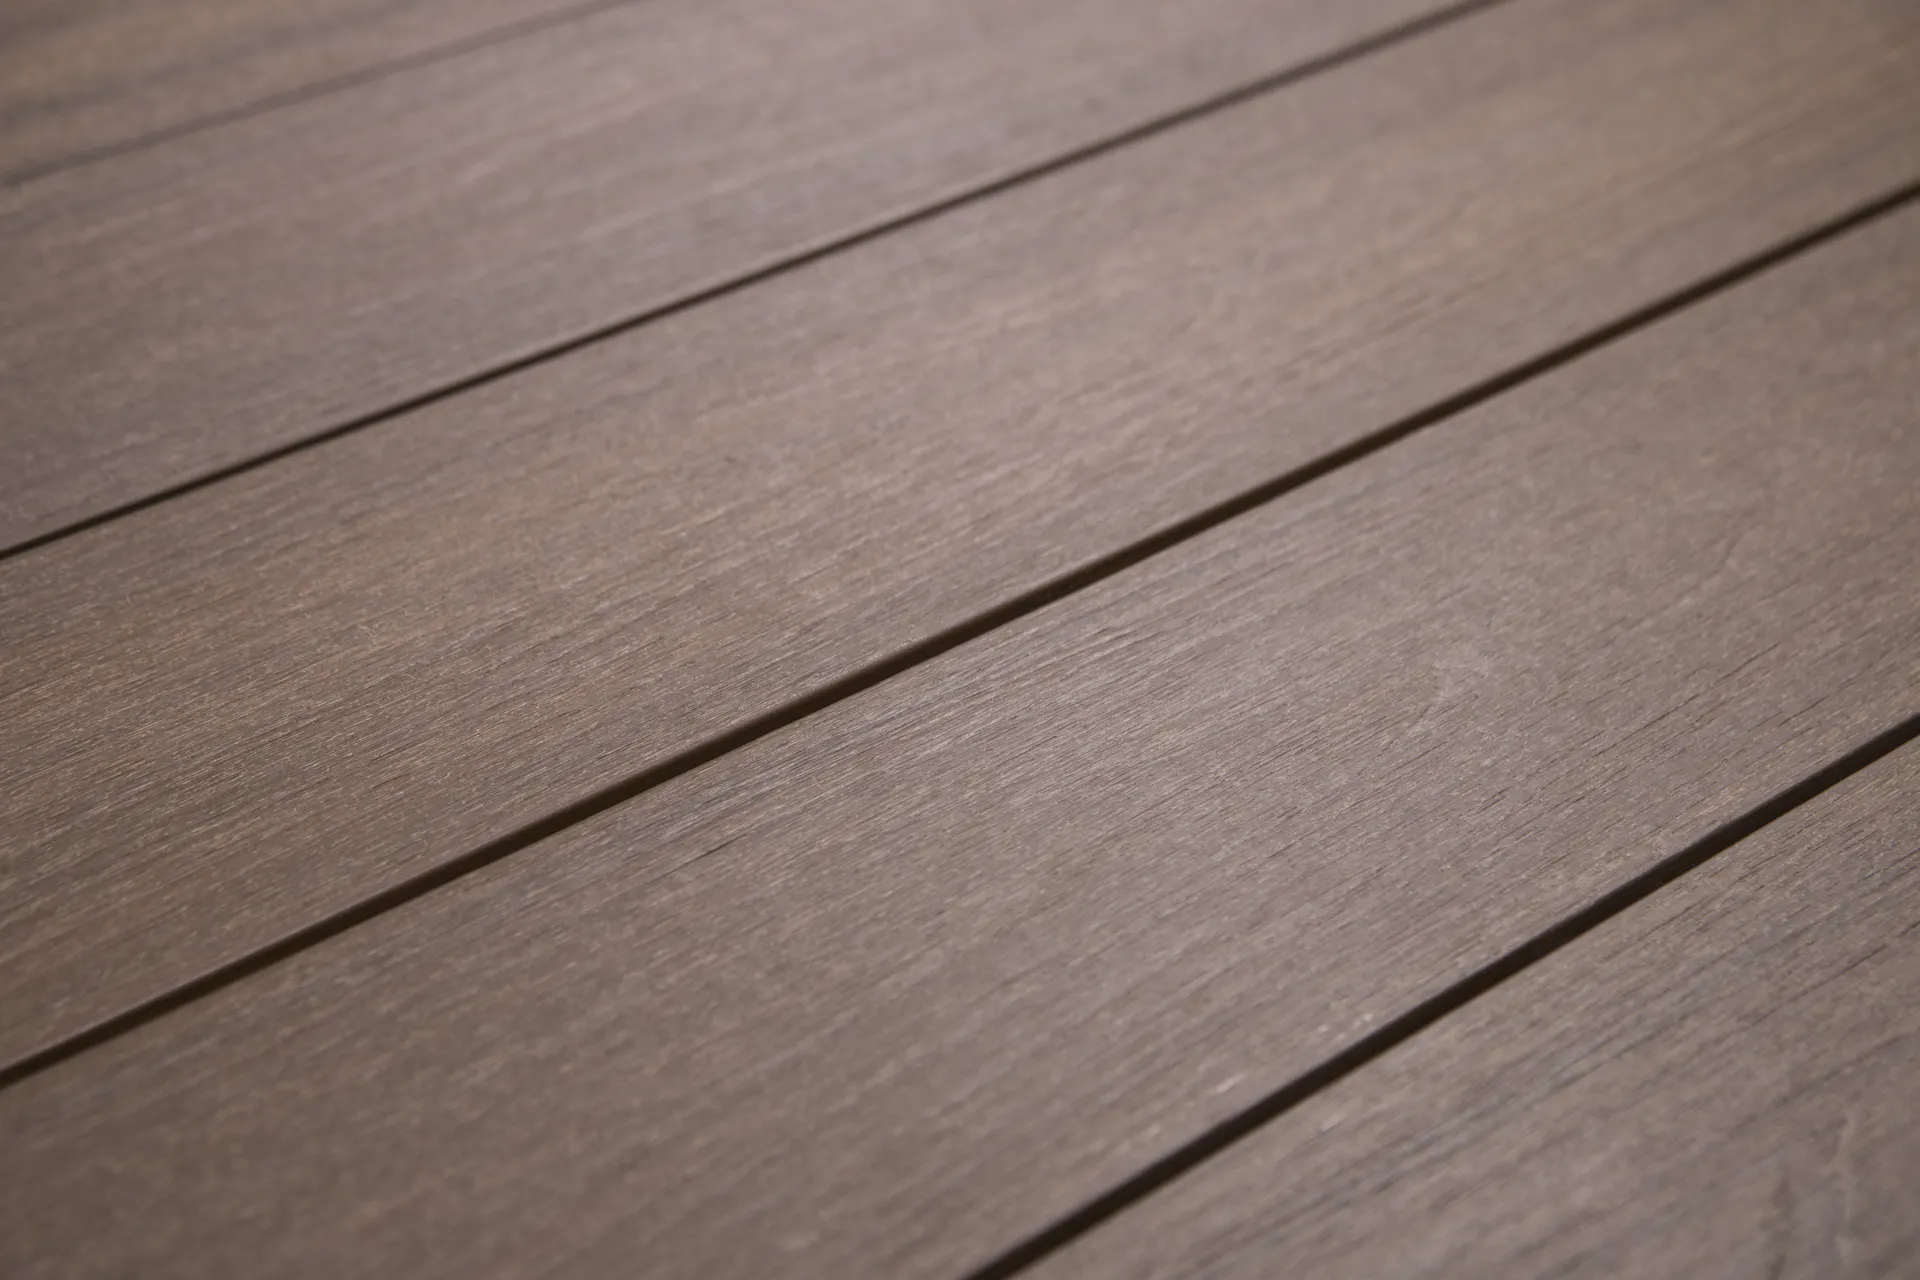 Close-up of textured brown decking boards arranged horizontally.